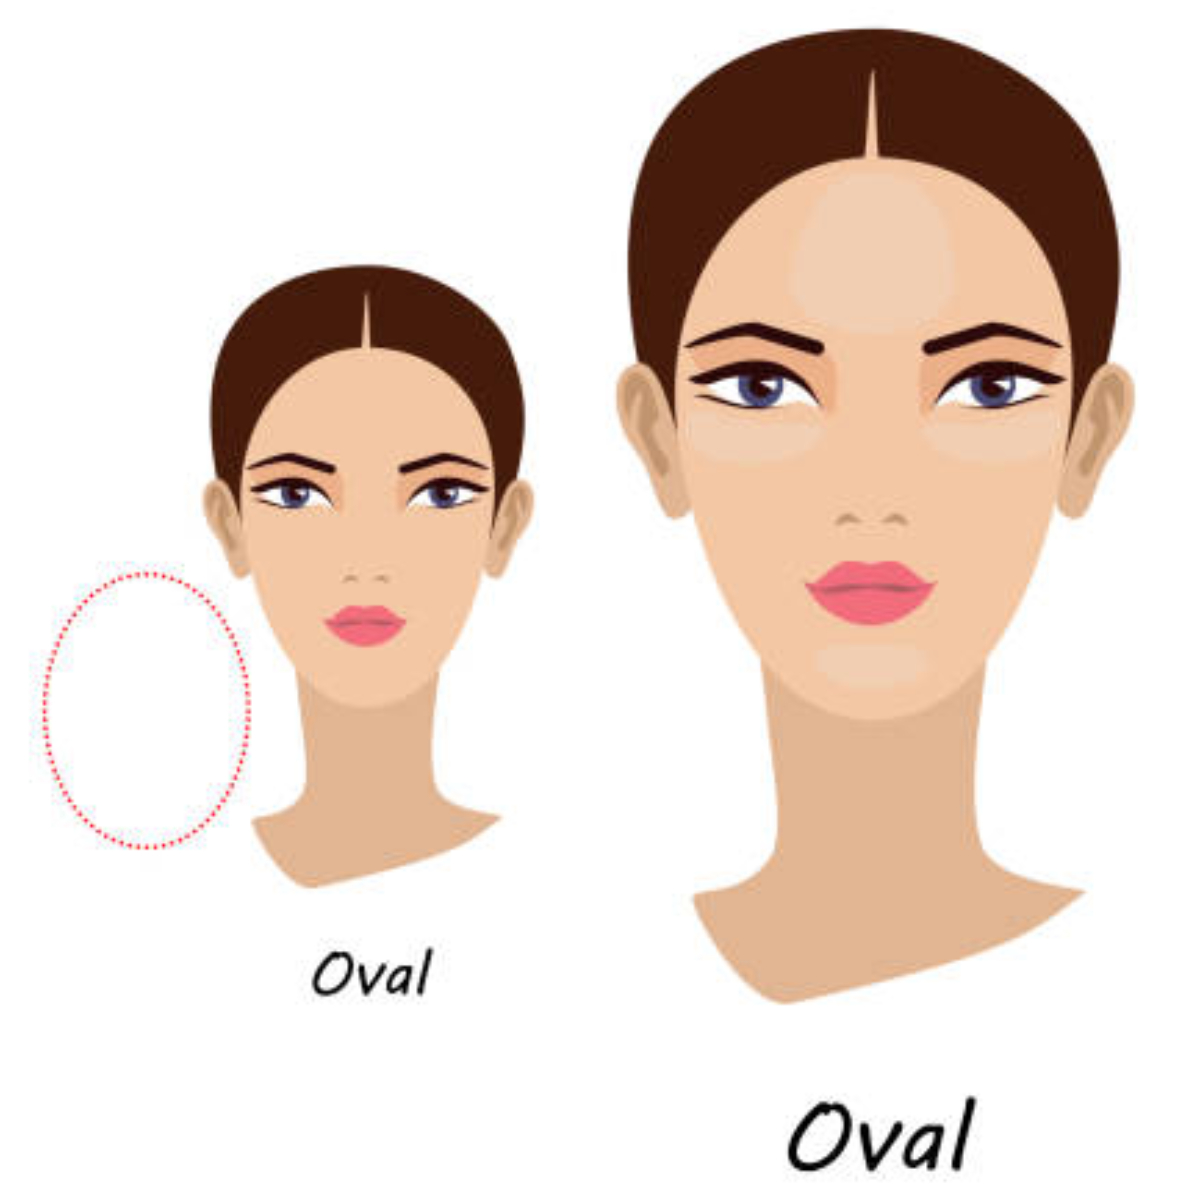 Premium Vector | Female face shapes and haircuts